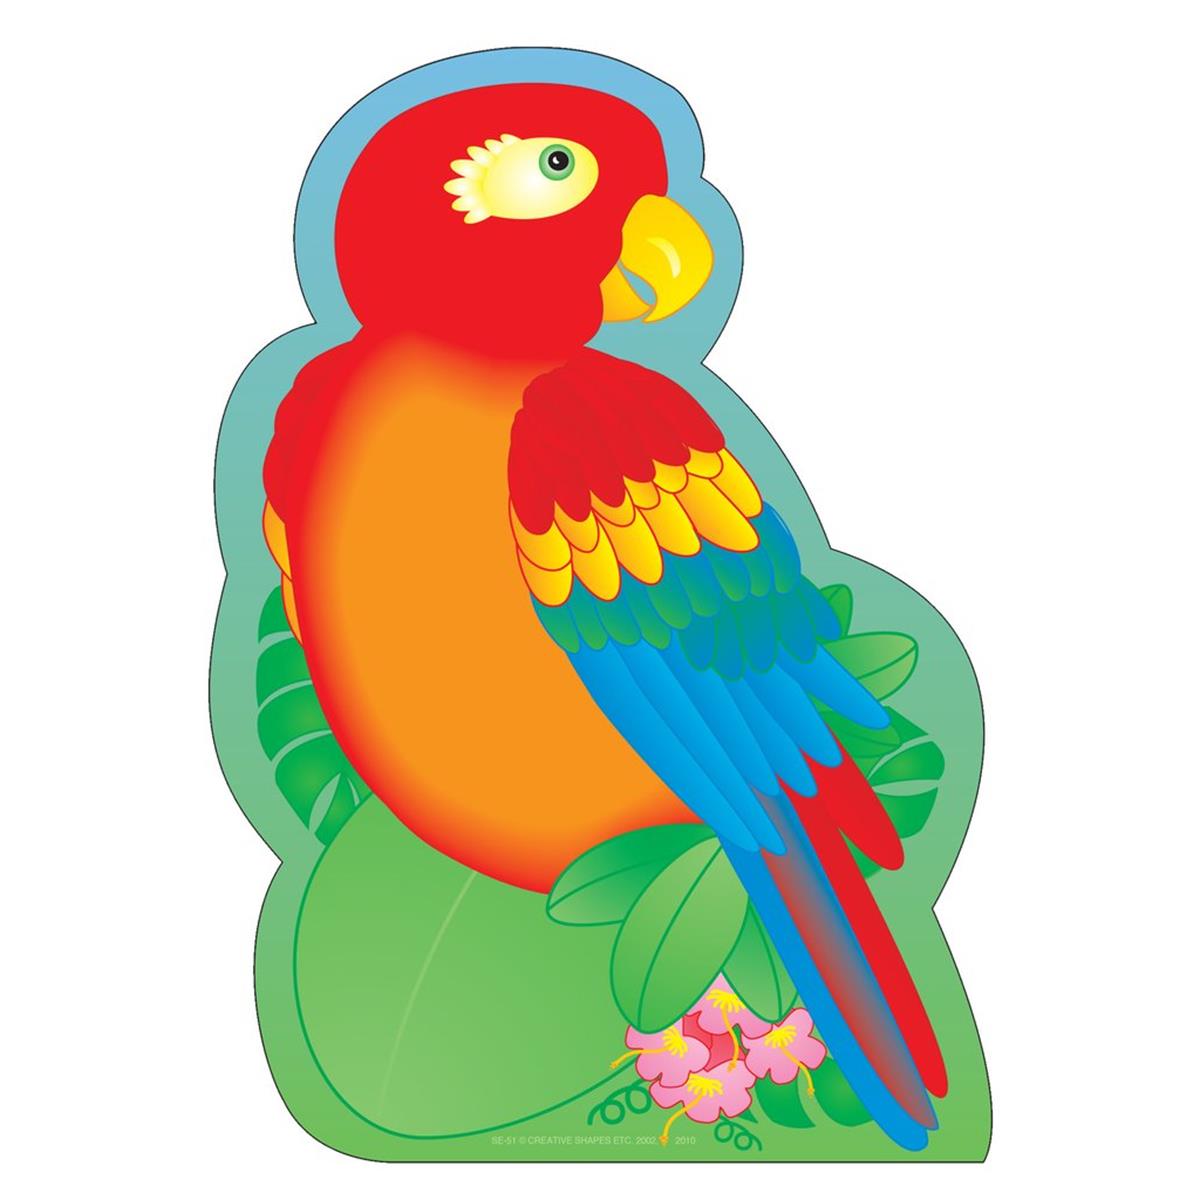 Se-0051 9 X 6 In. Large Notepad, Parrot - 50 Sheets Per Pack